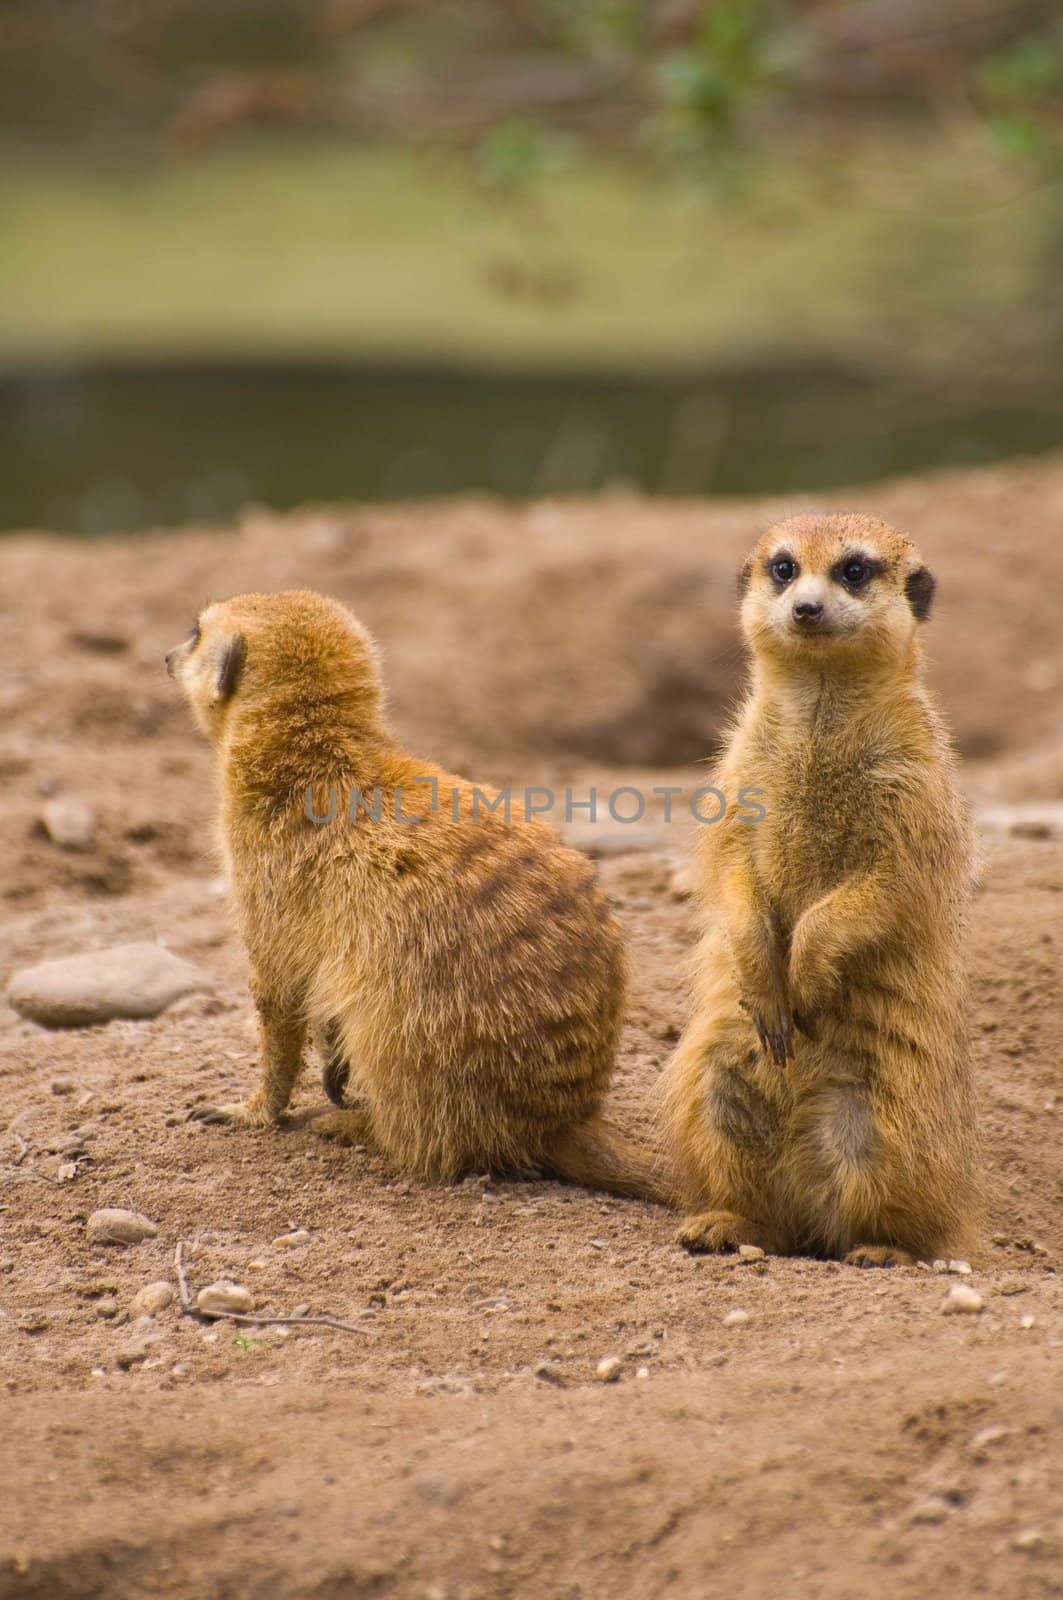 Two meerkats on the lookout